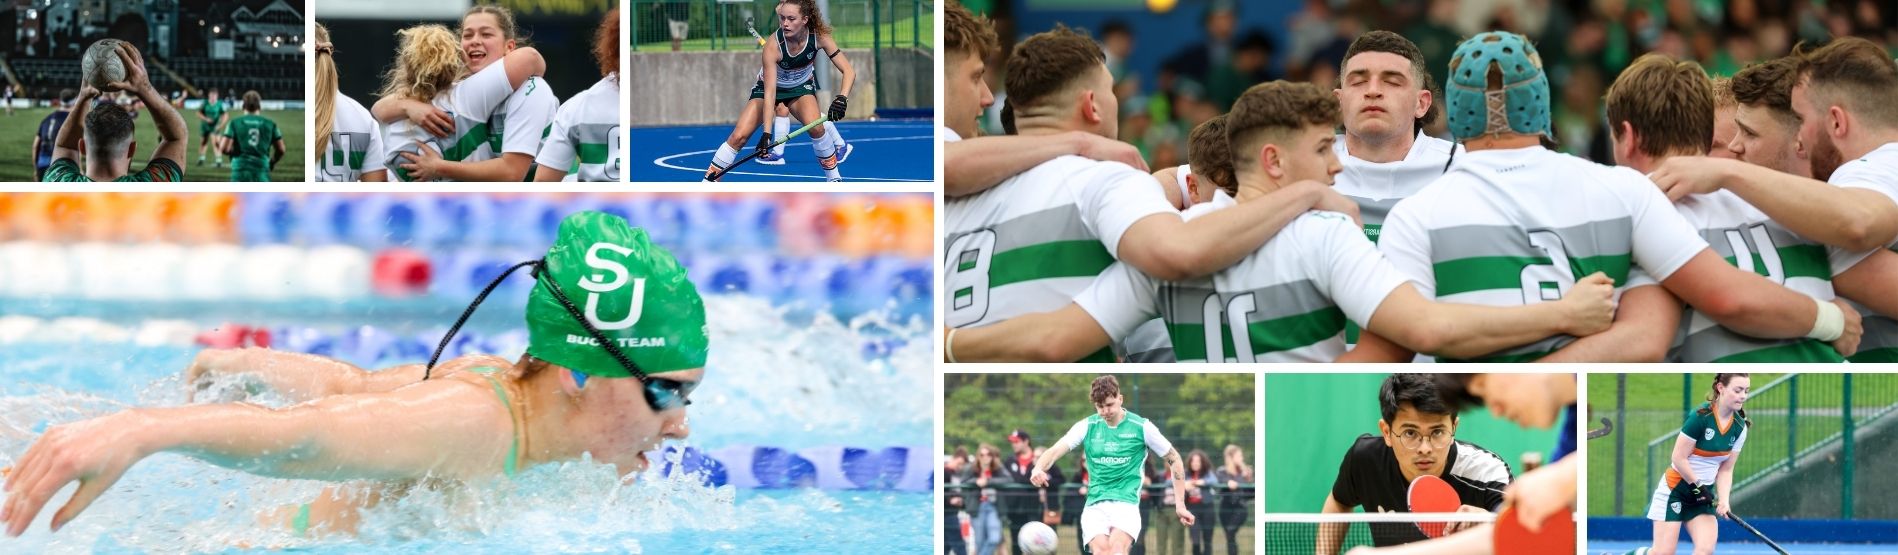 A mixture of images showcasing the various High Performance sports at Swansea University.